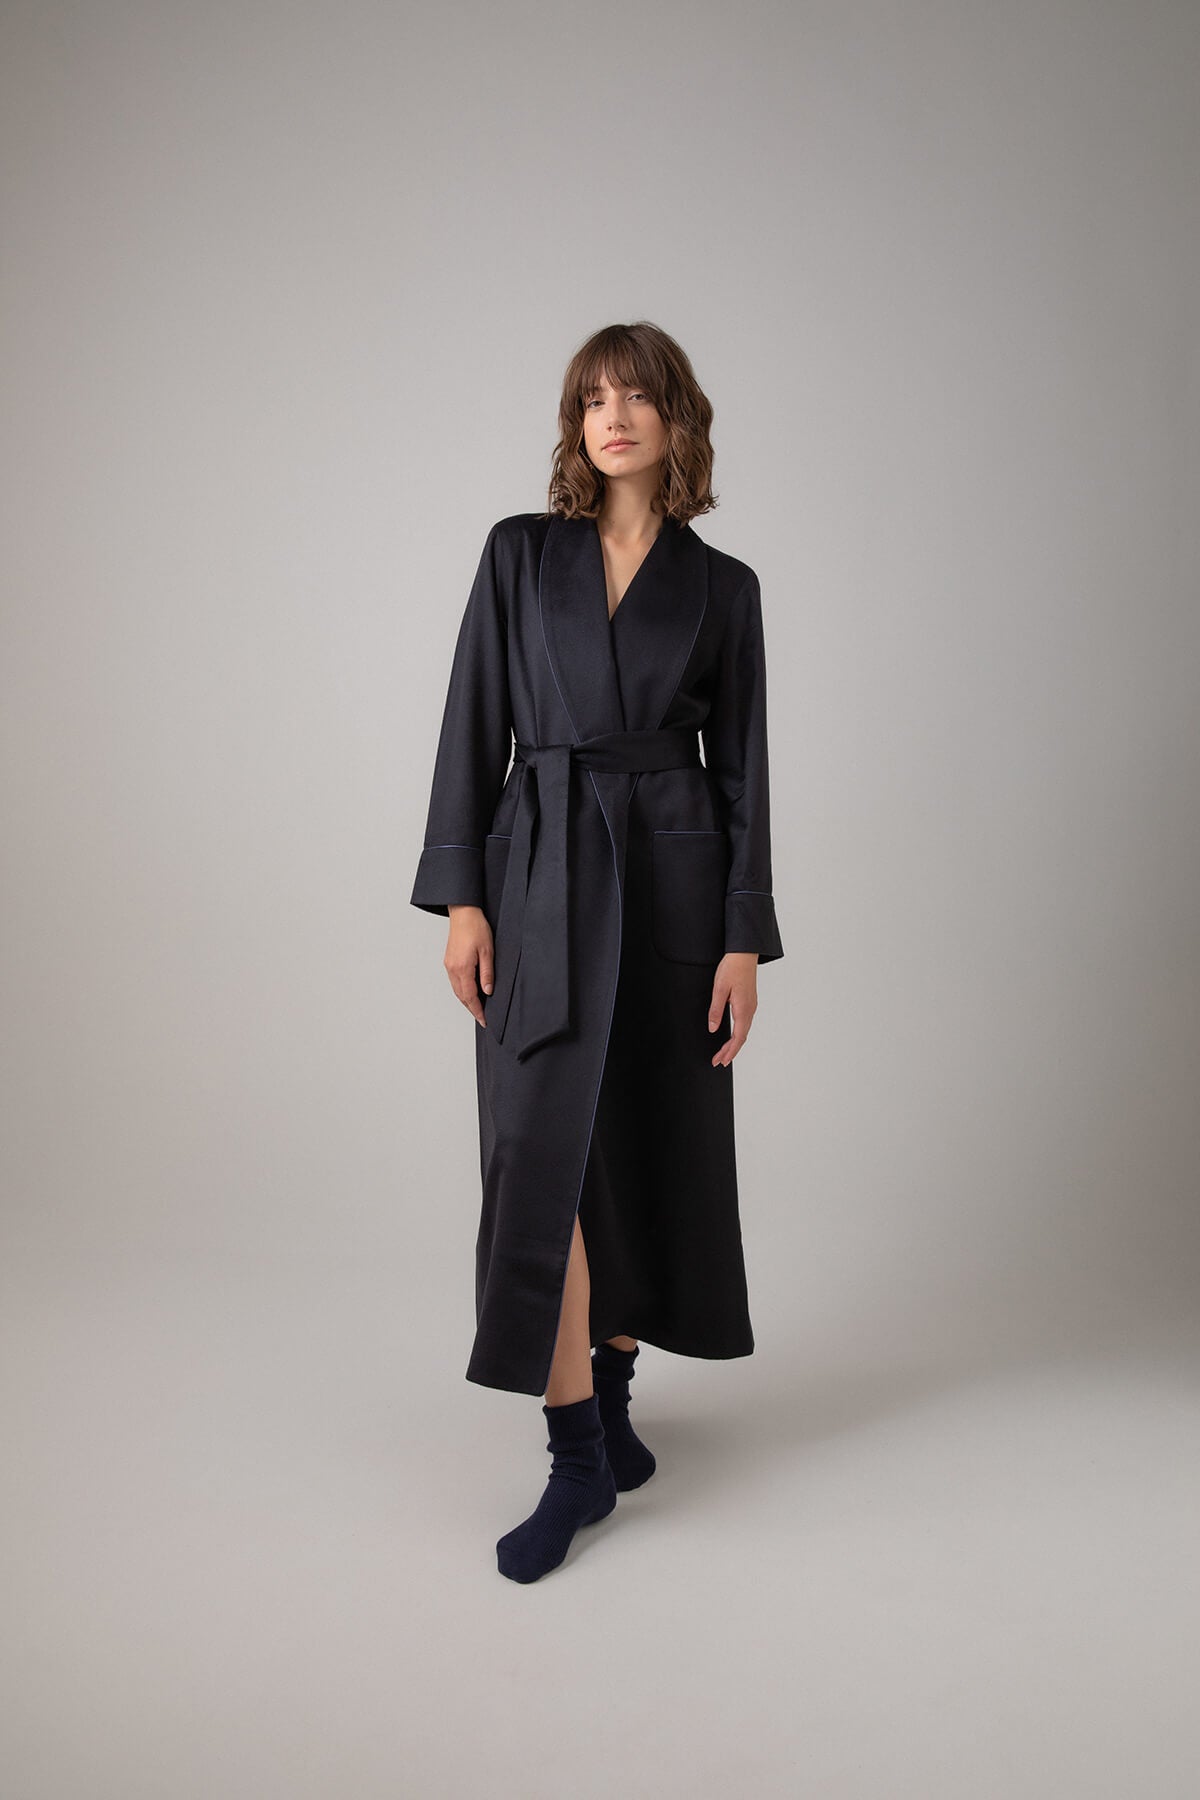 Johnstons of Elgin Women's Cashmere Dressing Gown with Silk Lining in Navy worn with Navy Cashmere Socks on a grey background TA000473RU65880